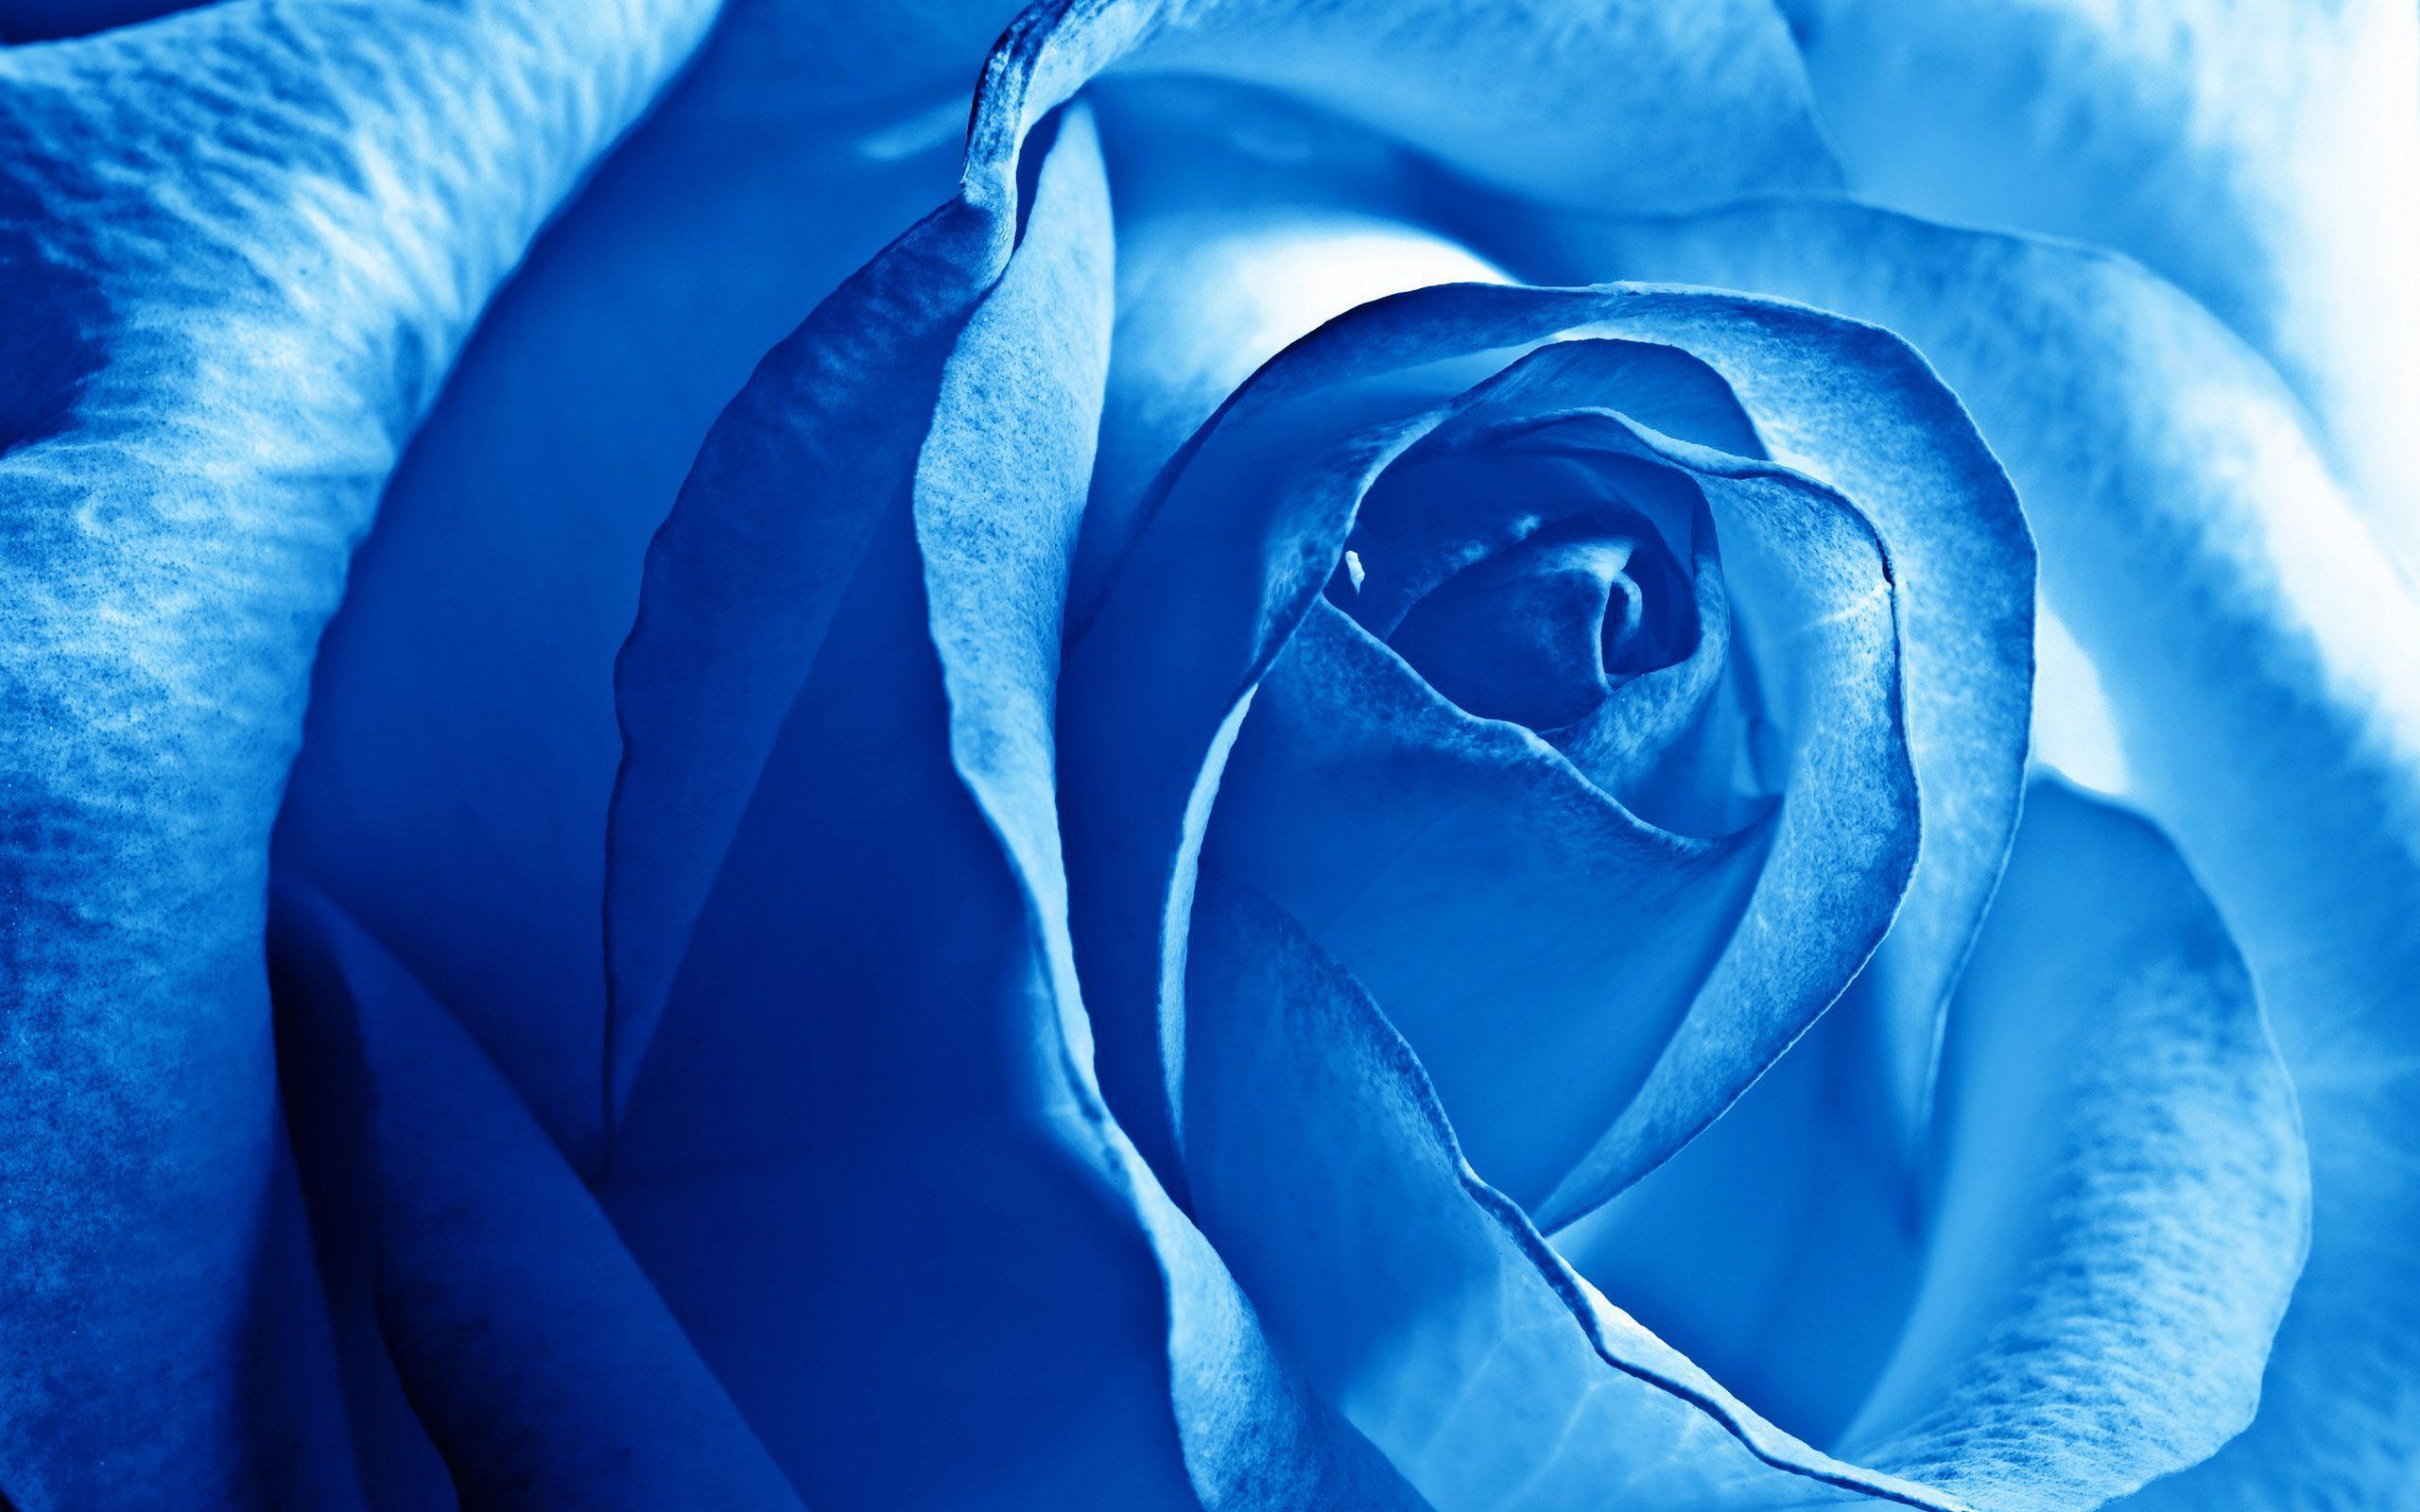 Wallpaper Tagged With ROSE. ROSE HD Wallpaper